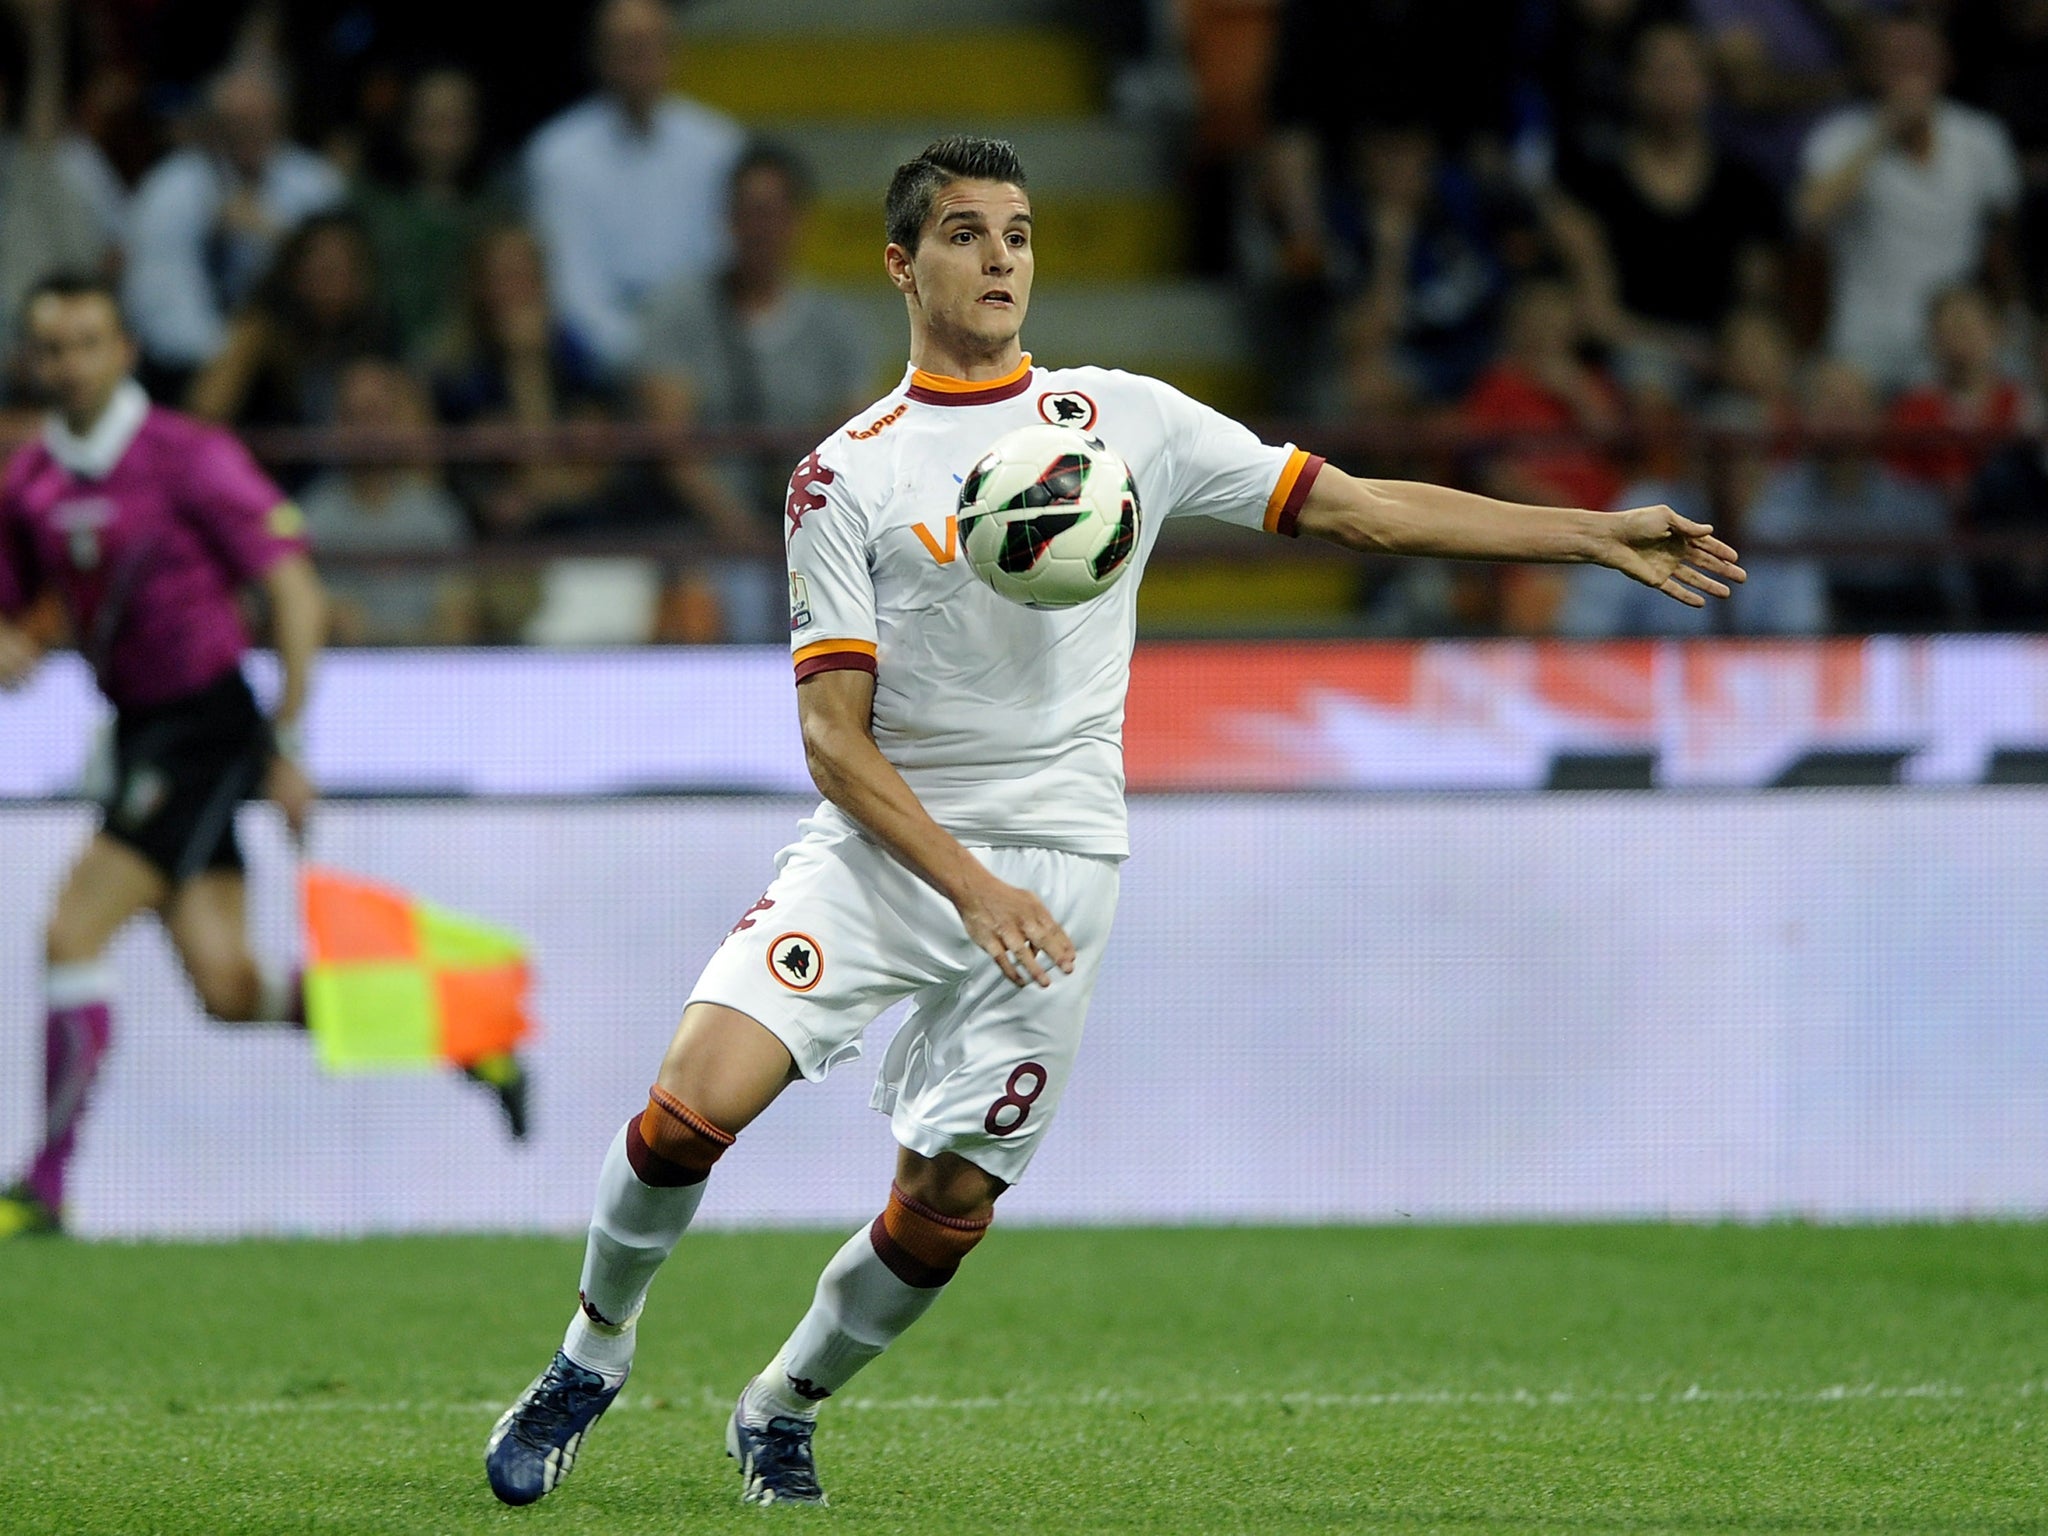 Villas-Boas is likely to move for 21-year-old Roma striker Erik Lamela